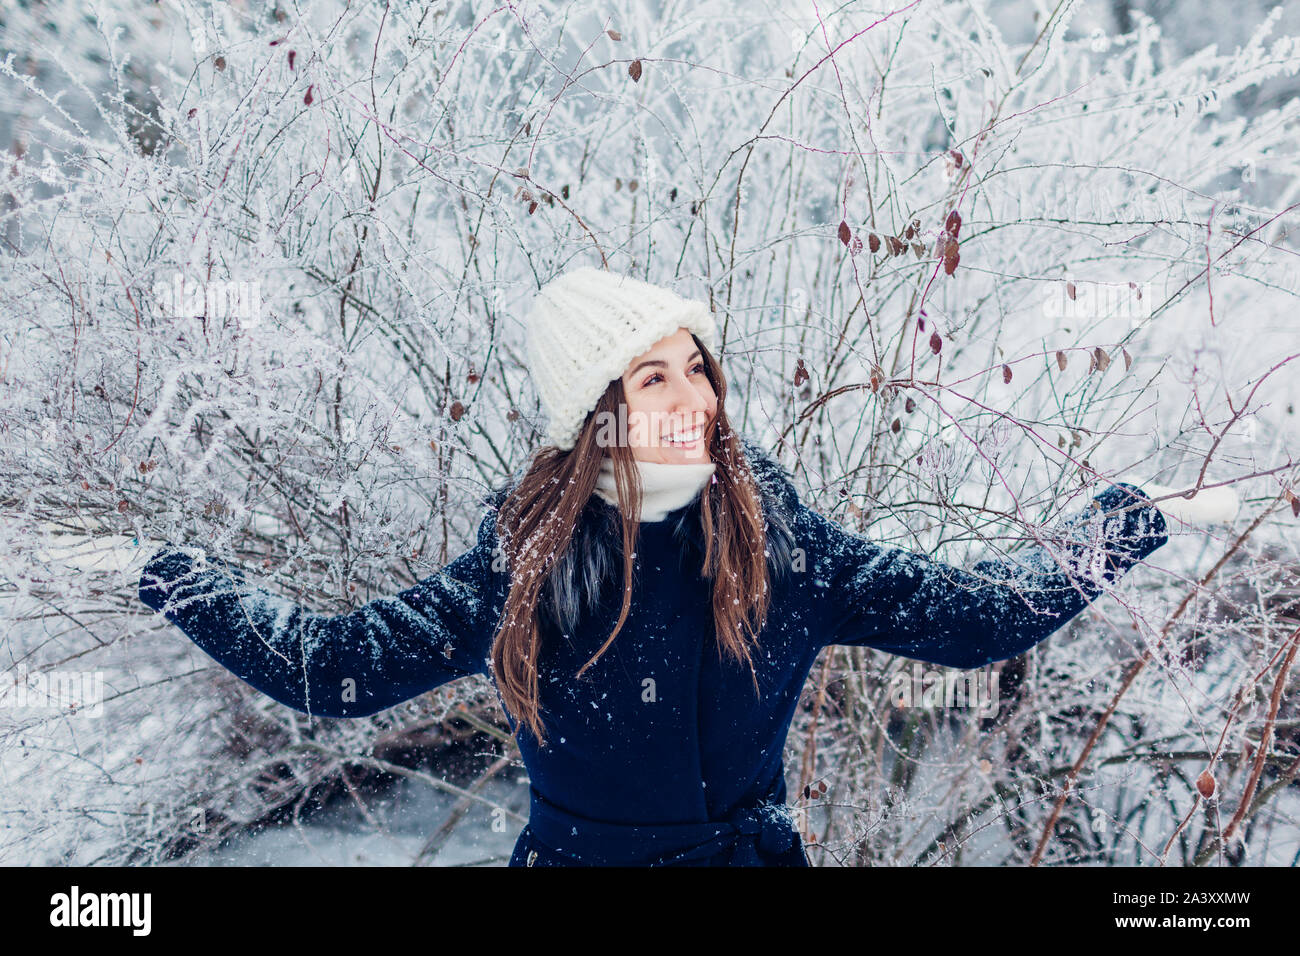 Winter activities. Young woman shaking branches with hoarfrost and snow ...